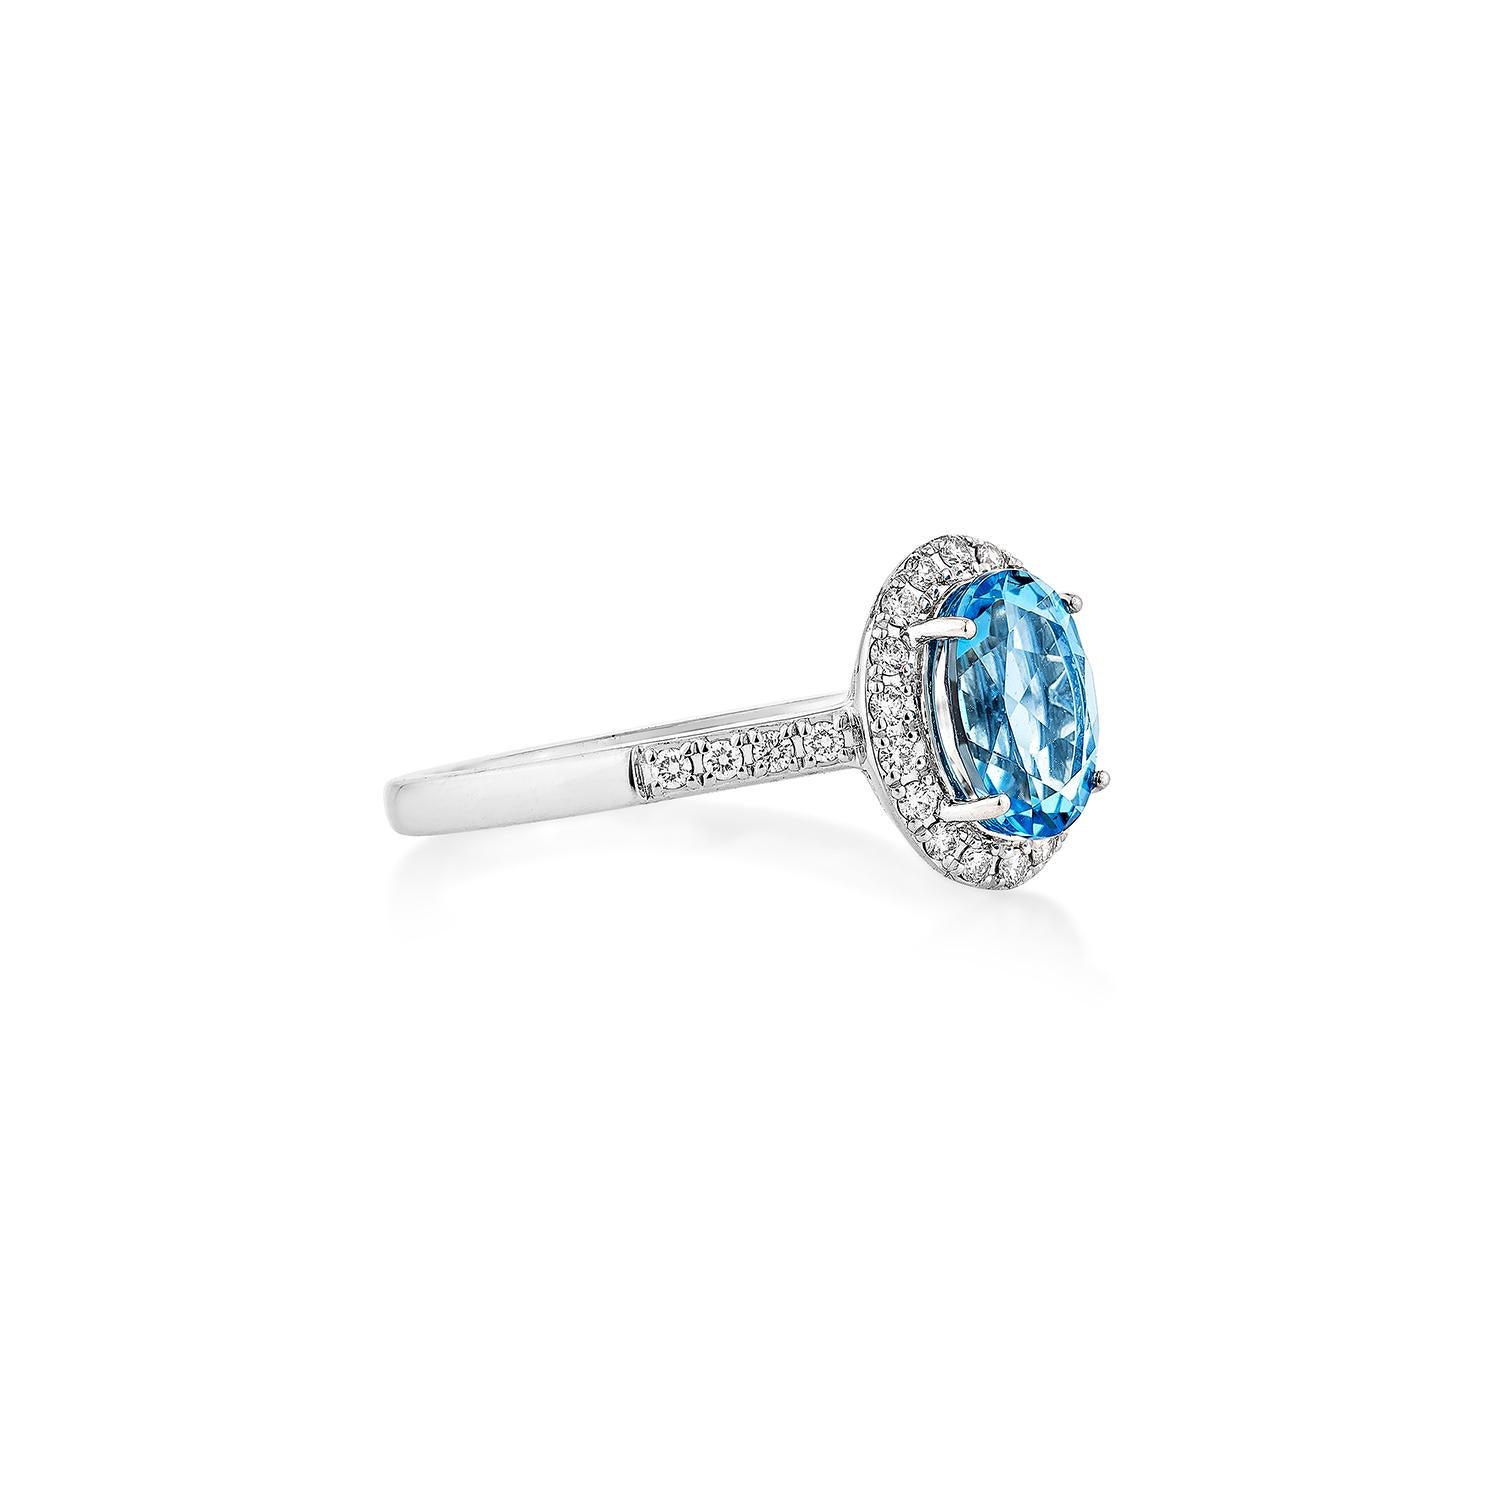 Presented A lovely Swiss Blue Topaz Fancy Ring is perfect for people who value quality and want to wear it to any occasion or celebration. The white gold swiss blue topaz ring adorned with diamond offer a classic yet elegant appearance. 

Swiss Blue